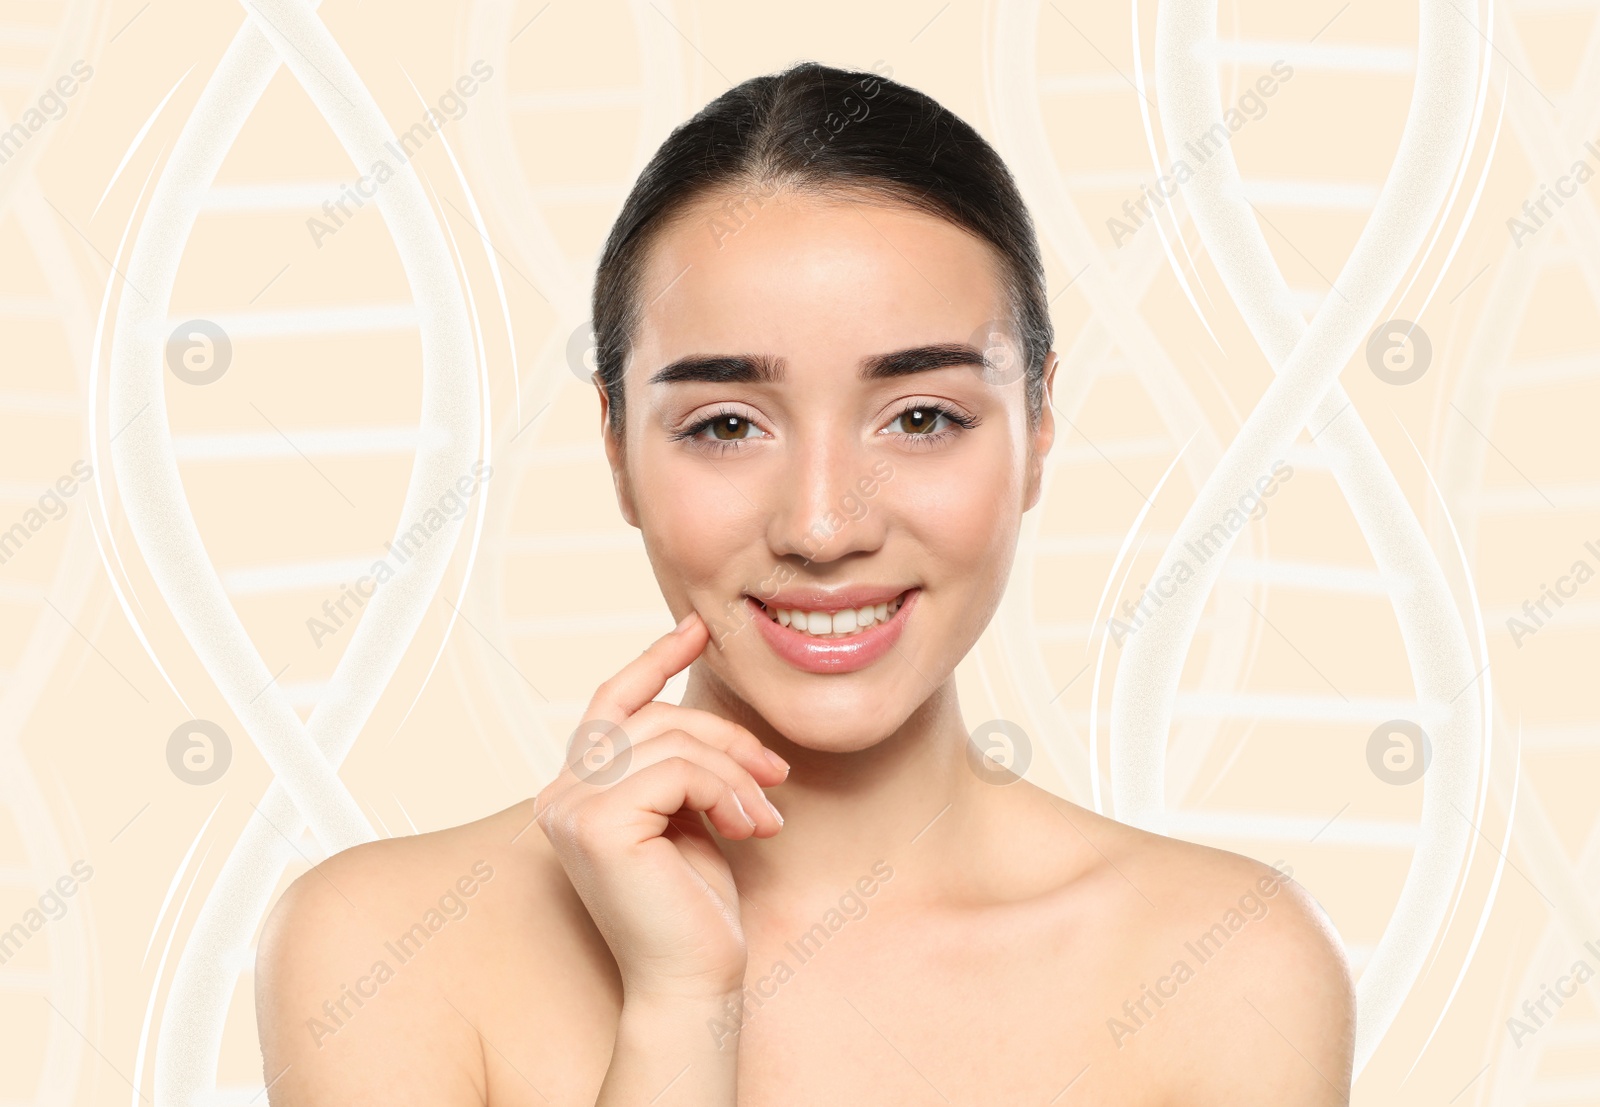 Image of Beautiful young woman against beige background with illustration of DNA chains